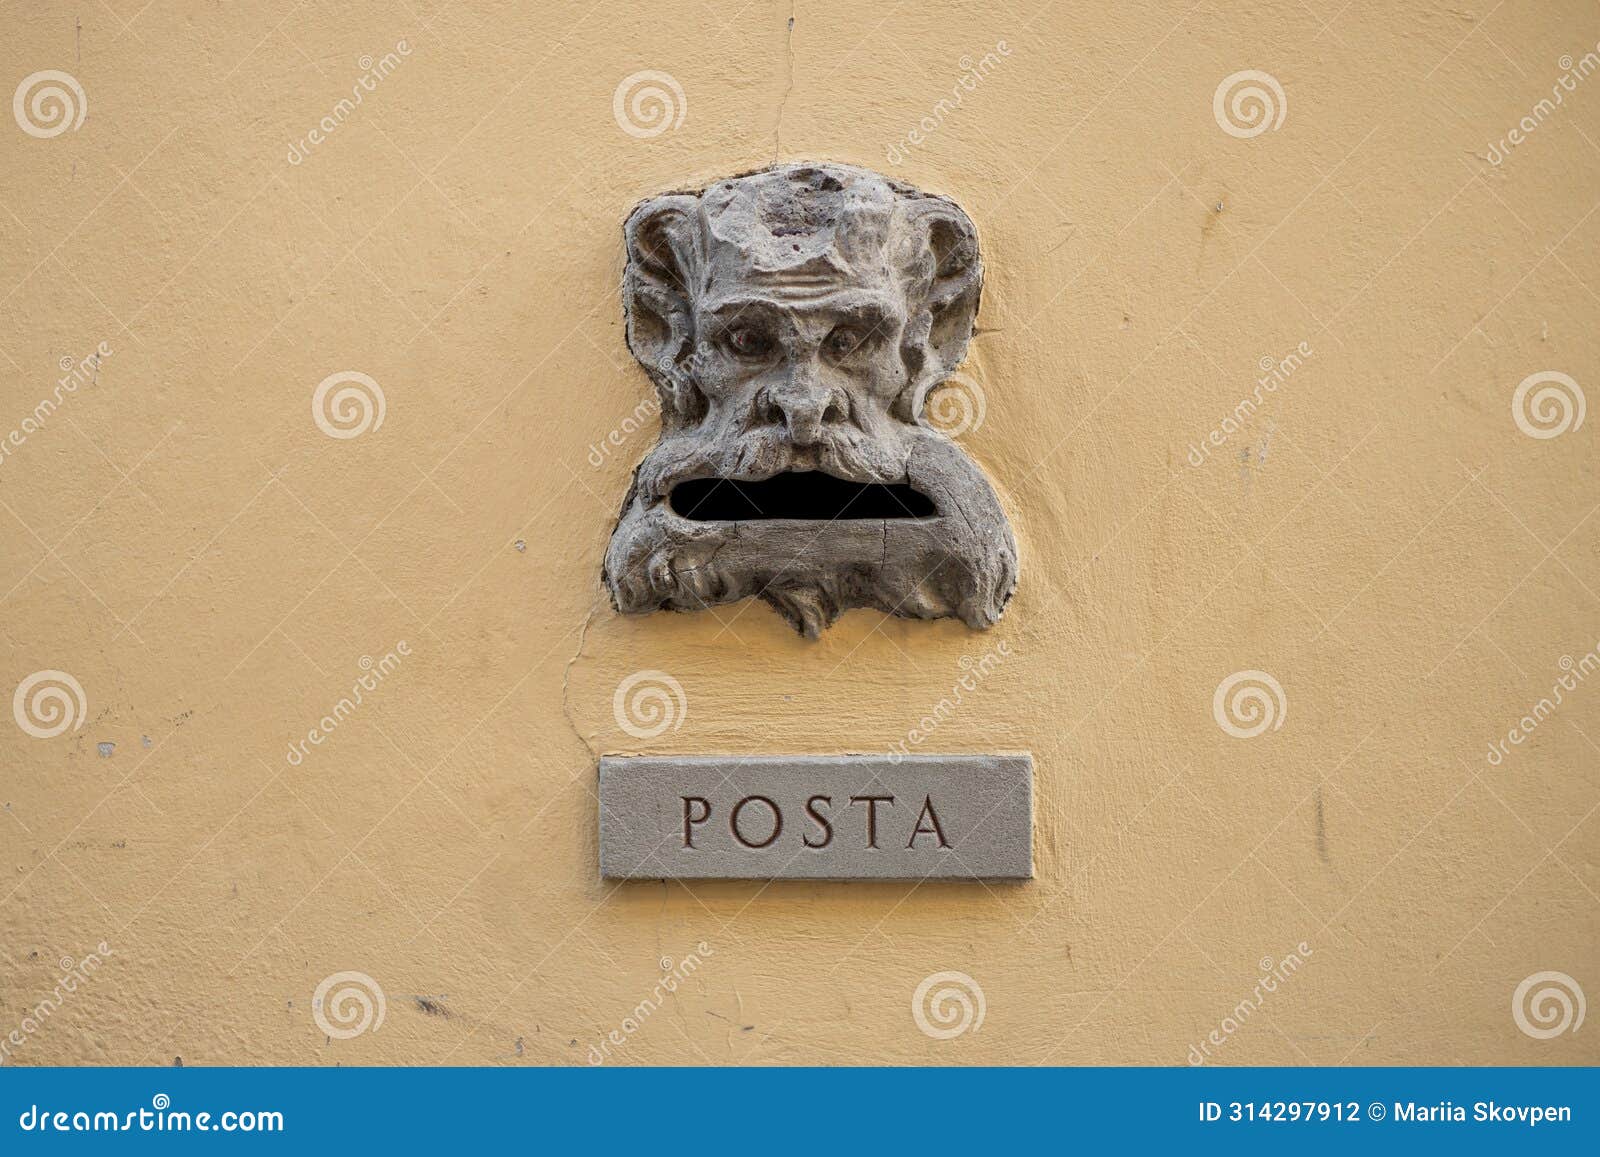 old italian mail slot with text posta in old wall